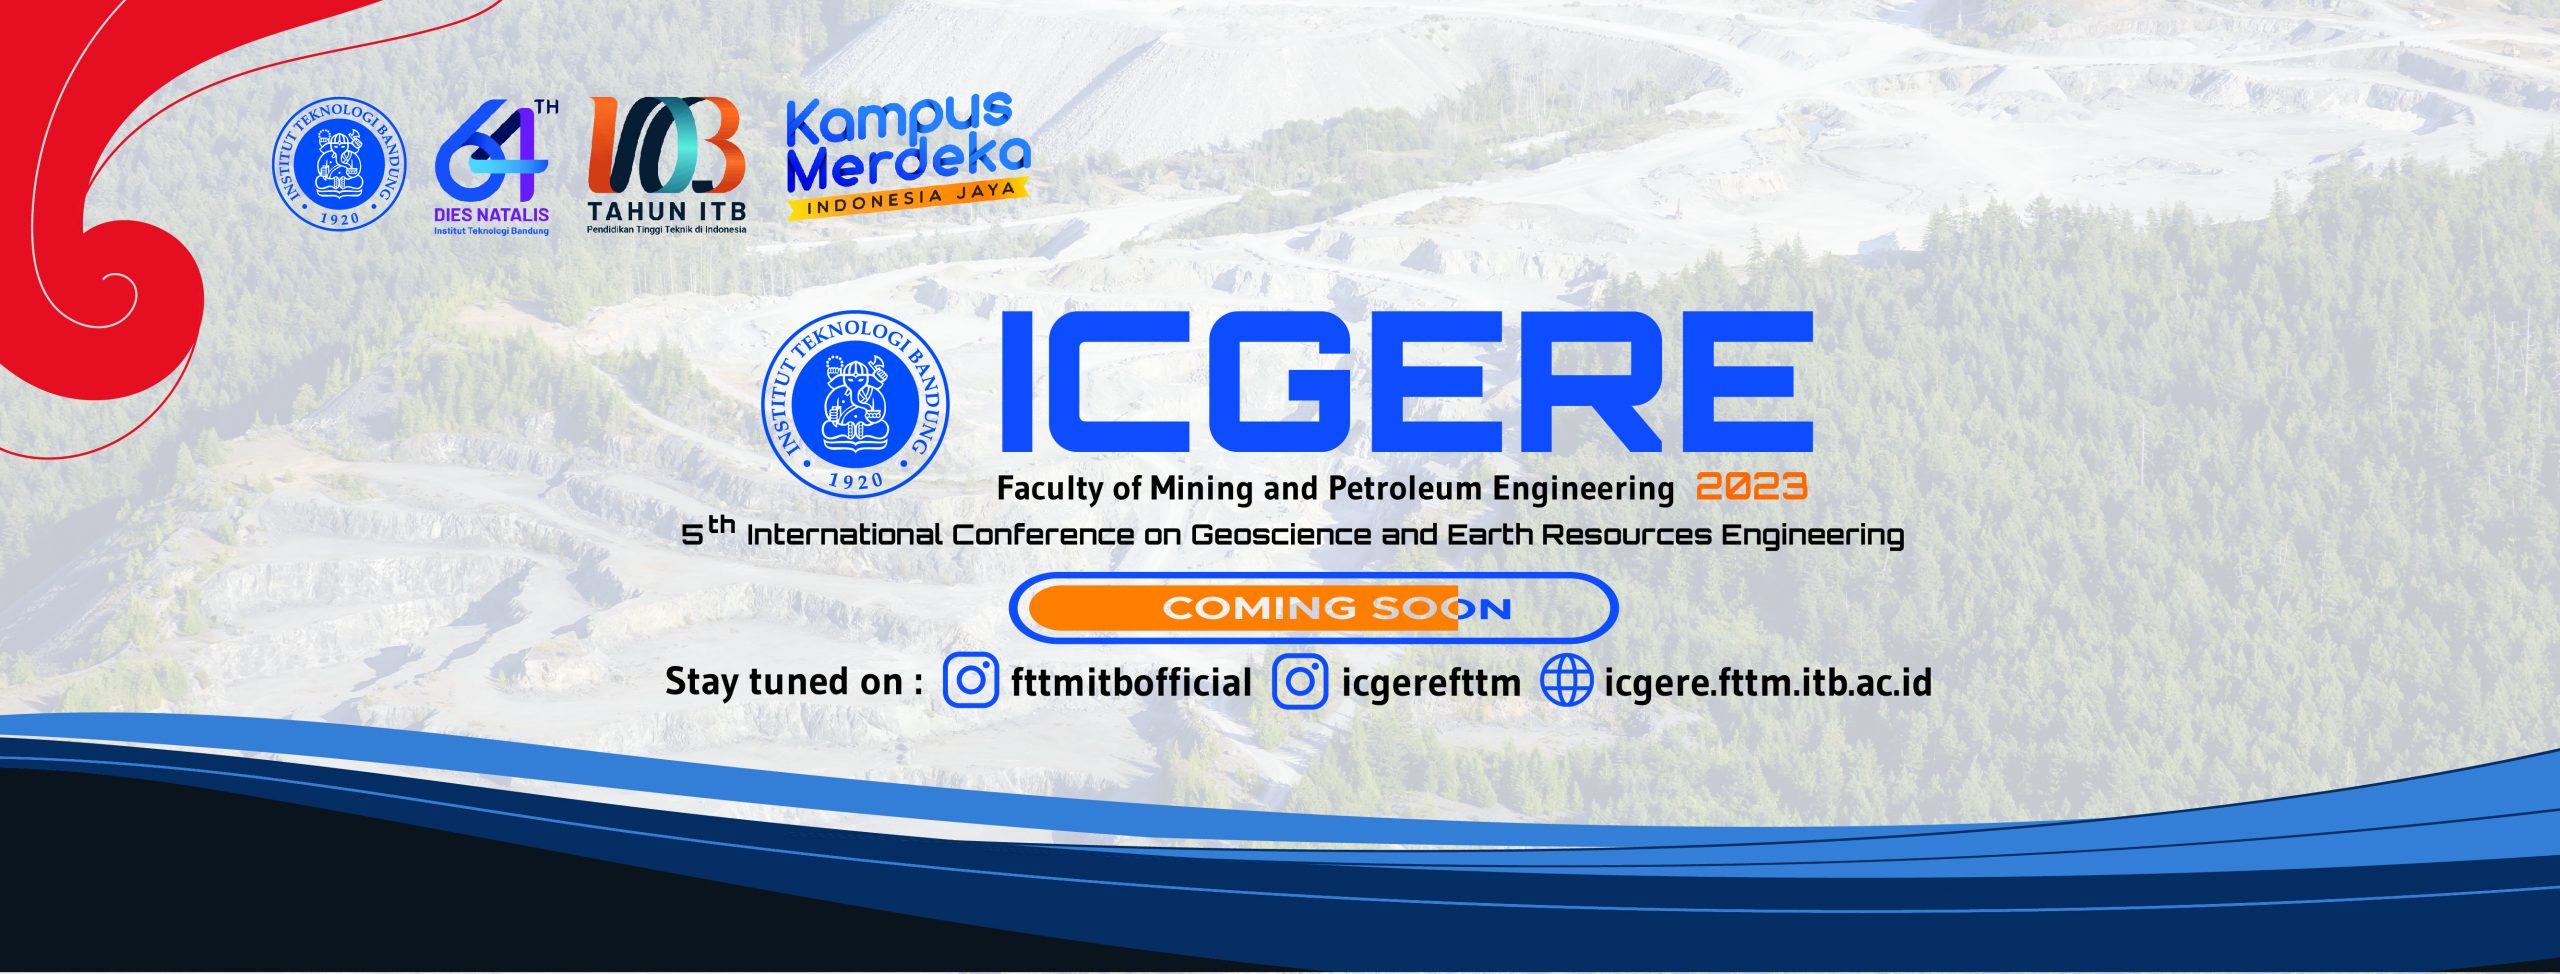 CALL FOR ABSTRACT 5th International Conference on Geoscience and Earth Resources Engineering (ICGERE)